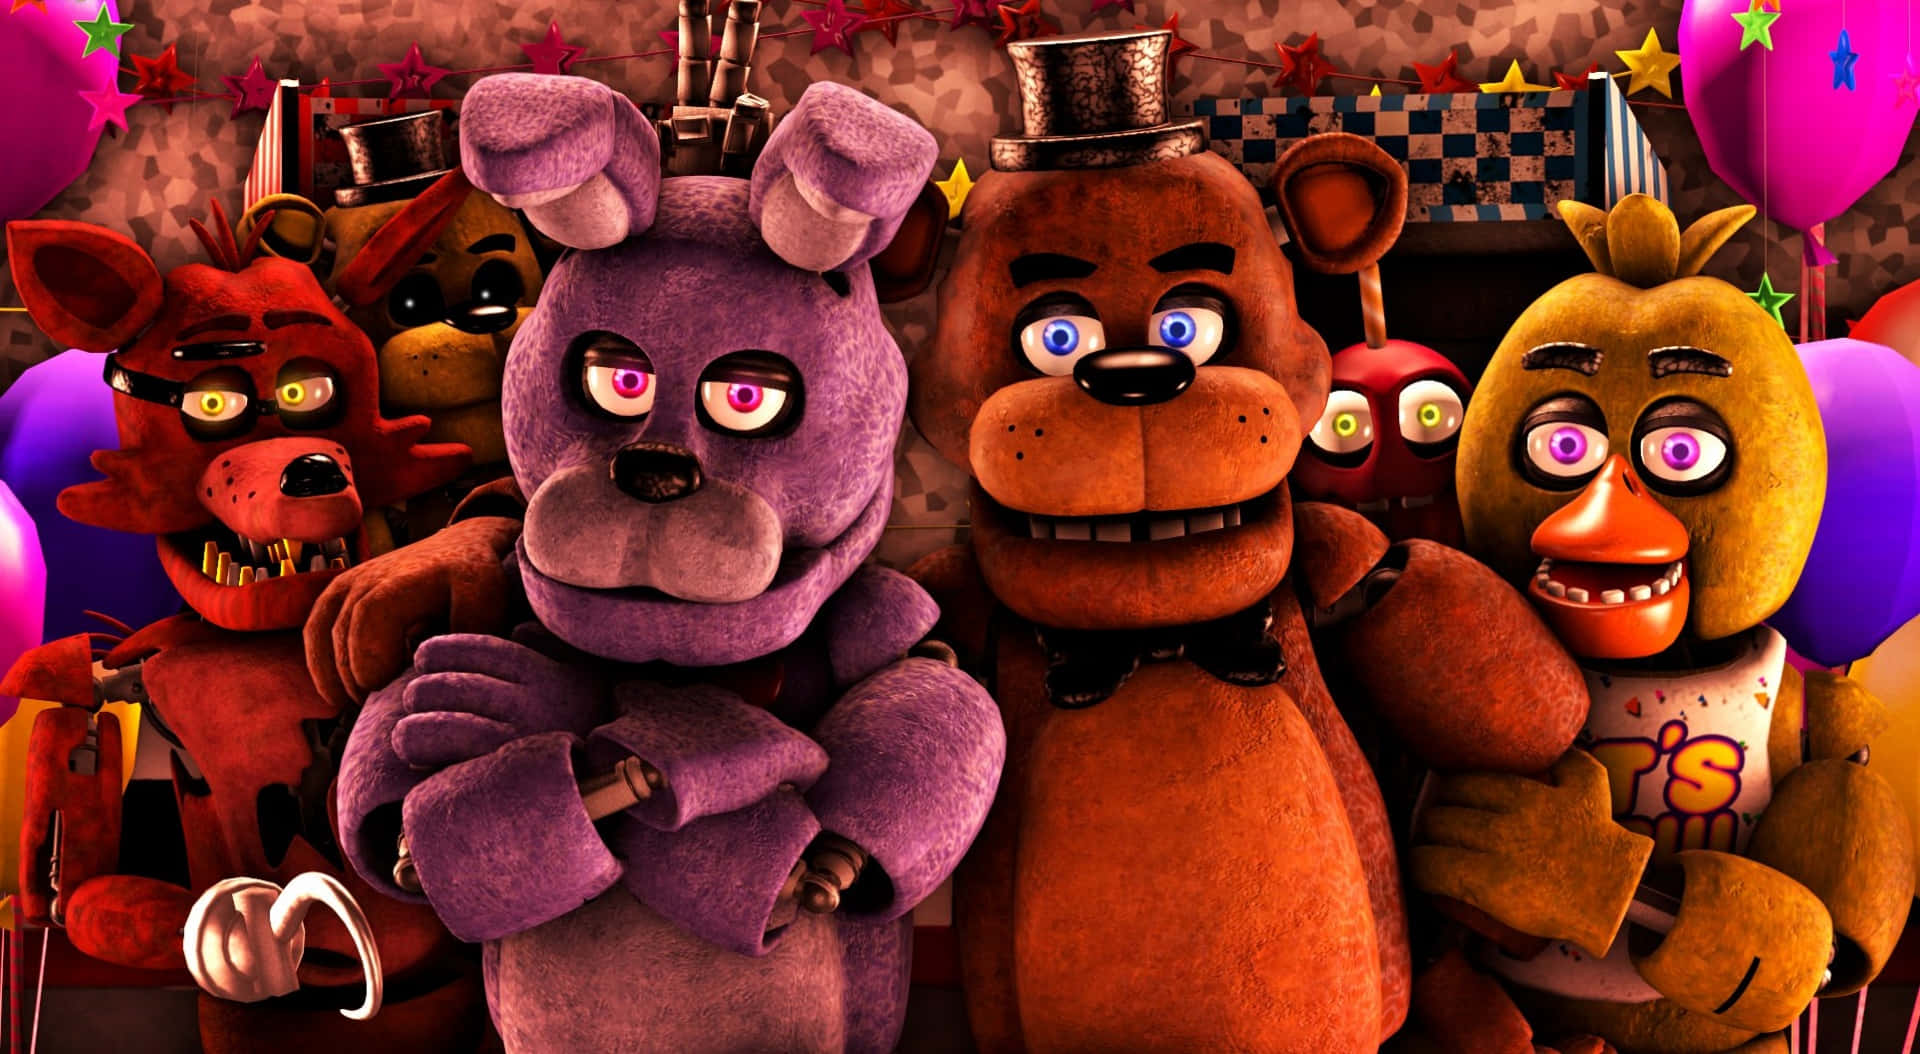 avril ward share picture of five nights at freddys photos